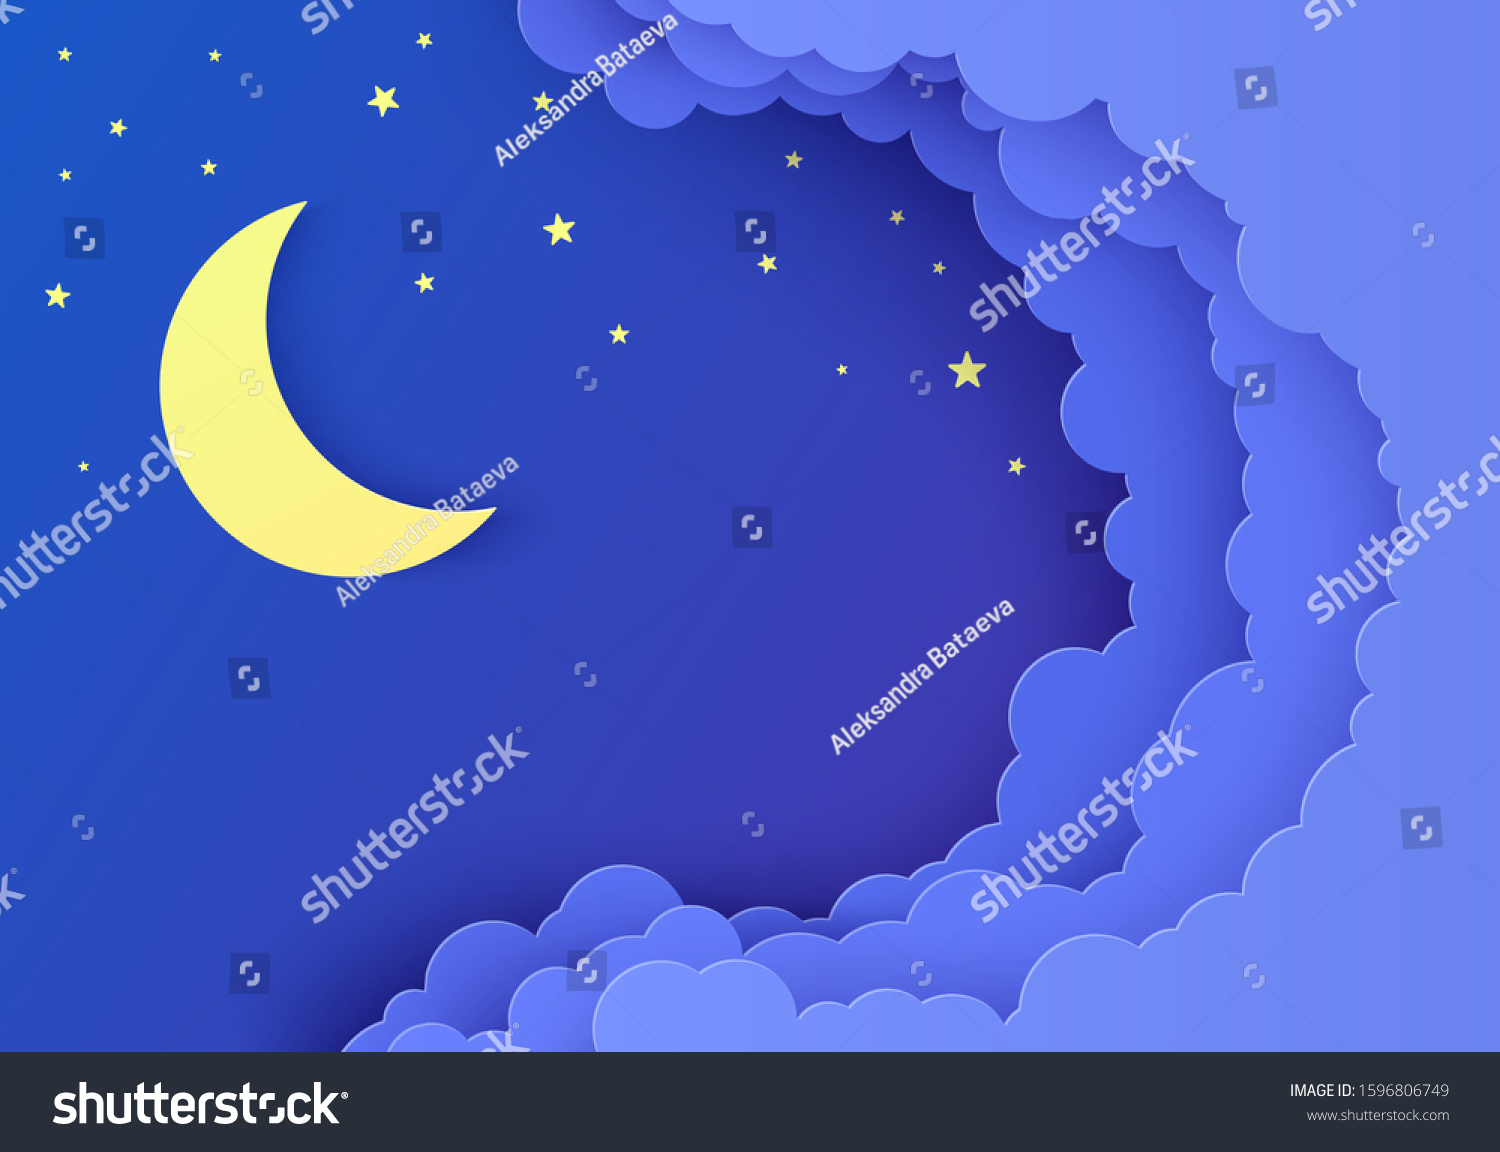 Night Sky Paper Cut Style 3d Stock Vector (Royalty Free) 1596806749 ...